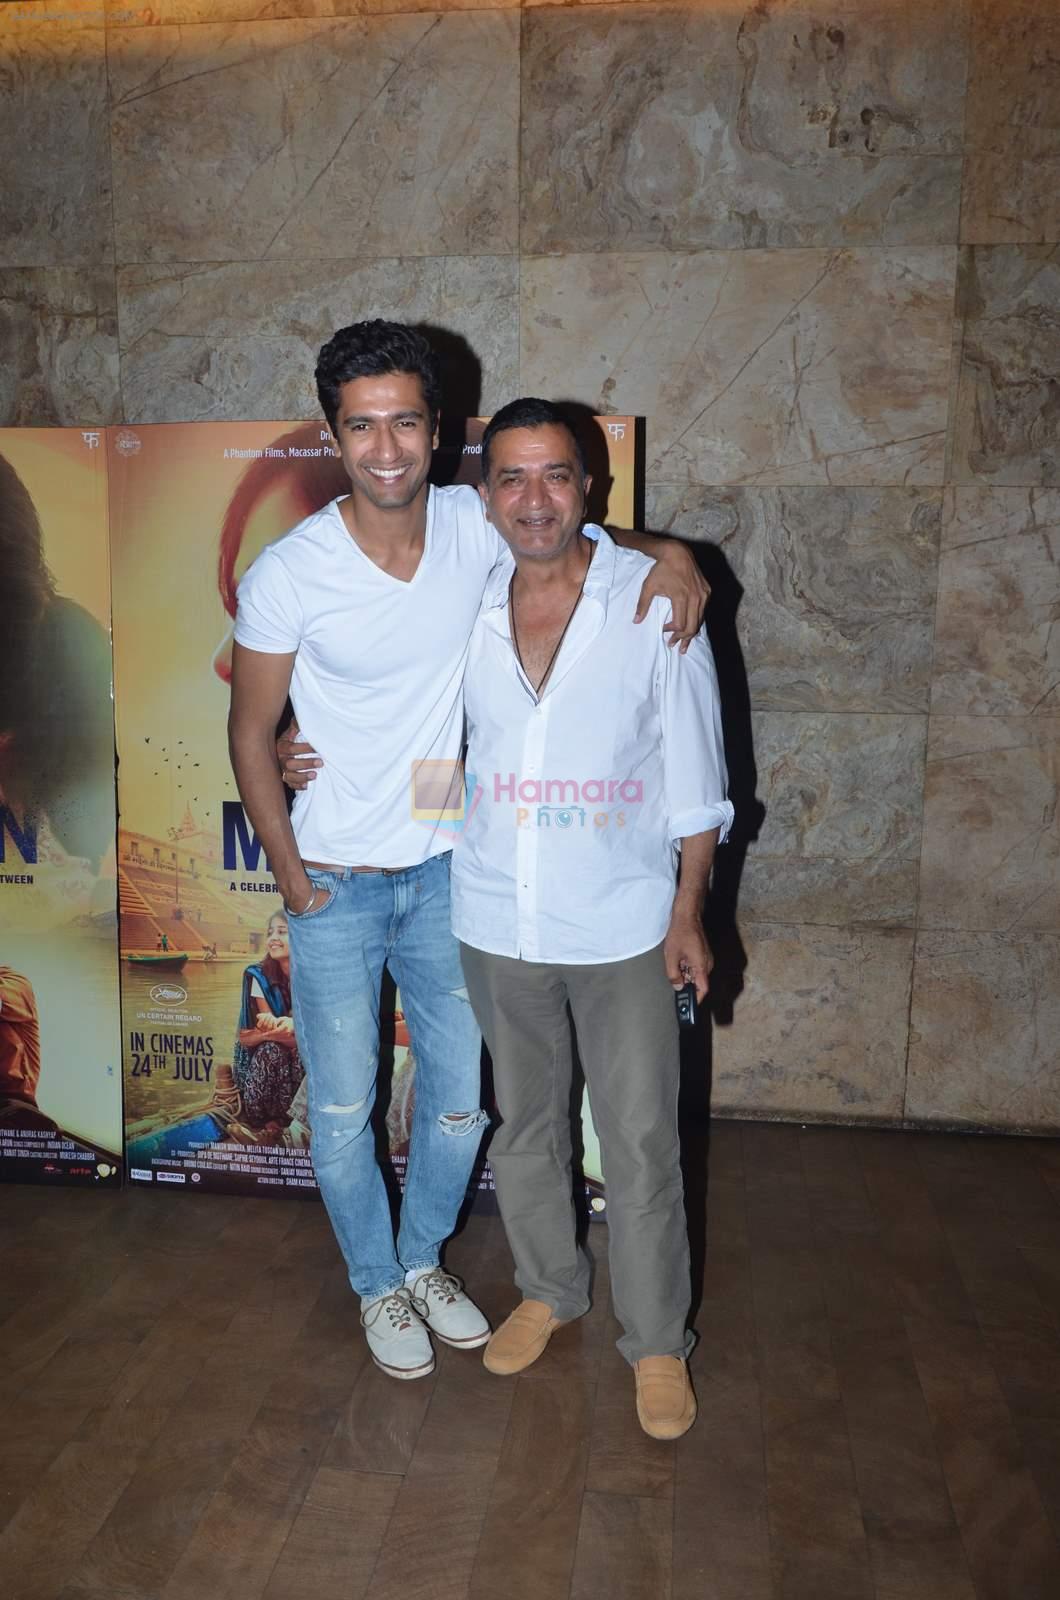 Vicky Kaushal at Masaan screening for Aamir Khan in Mumbai on 26th July 2015